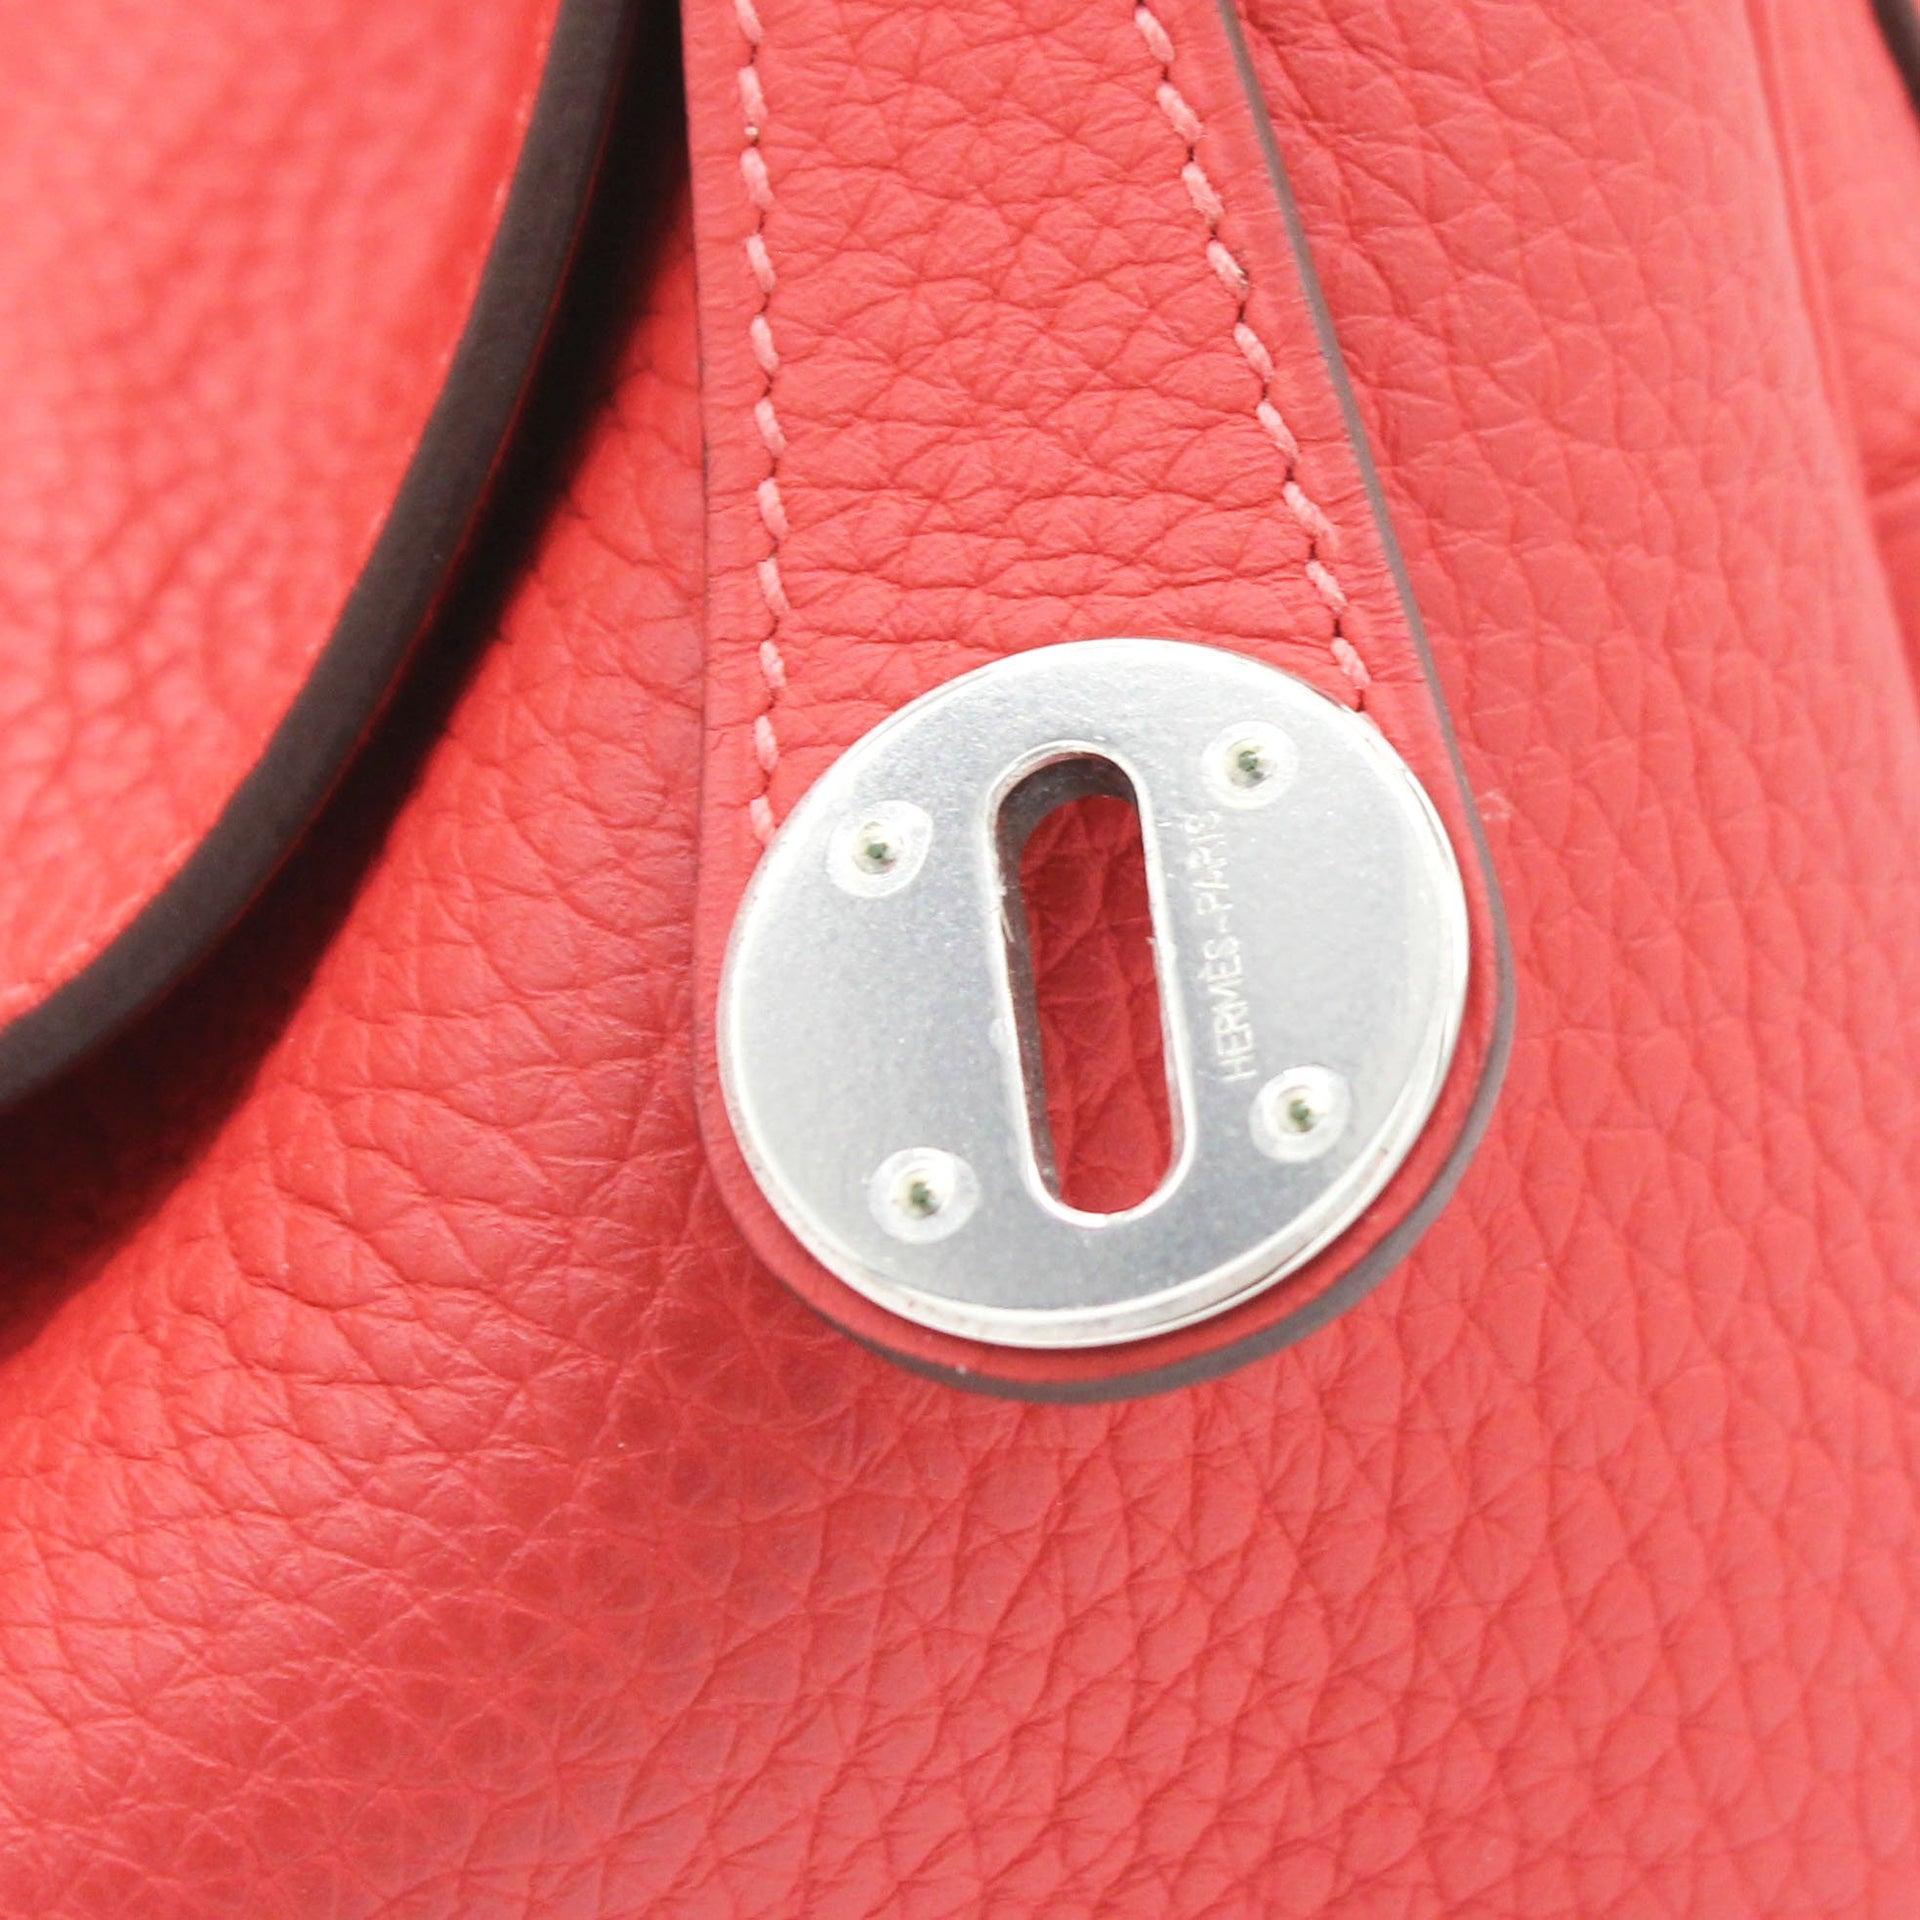 A ROUGE TOMATE CLÉMENCE LEATHER LINDY 26 WITH PALLADIUM HARDWARE